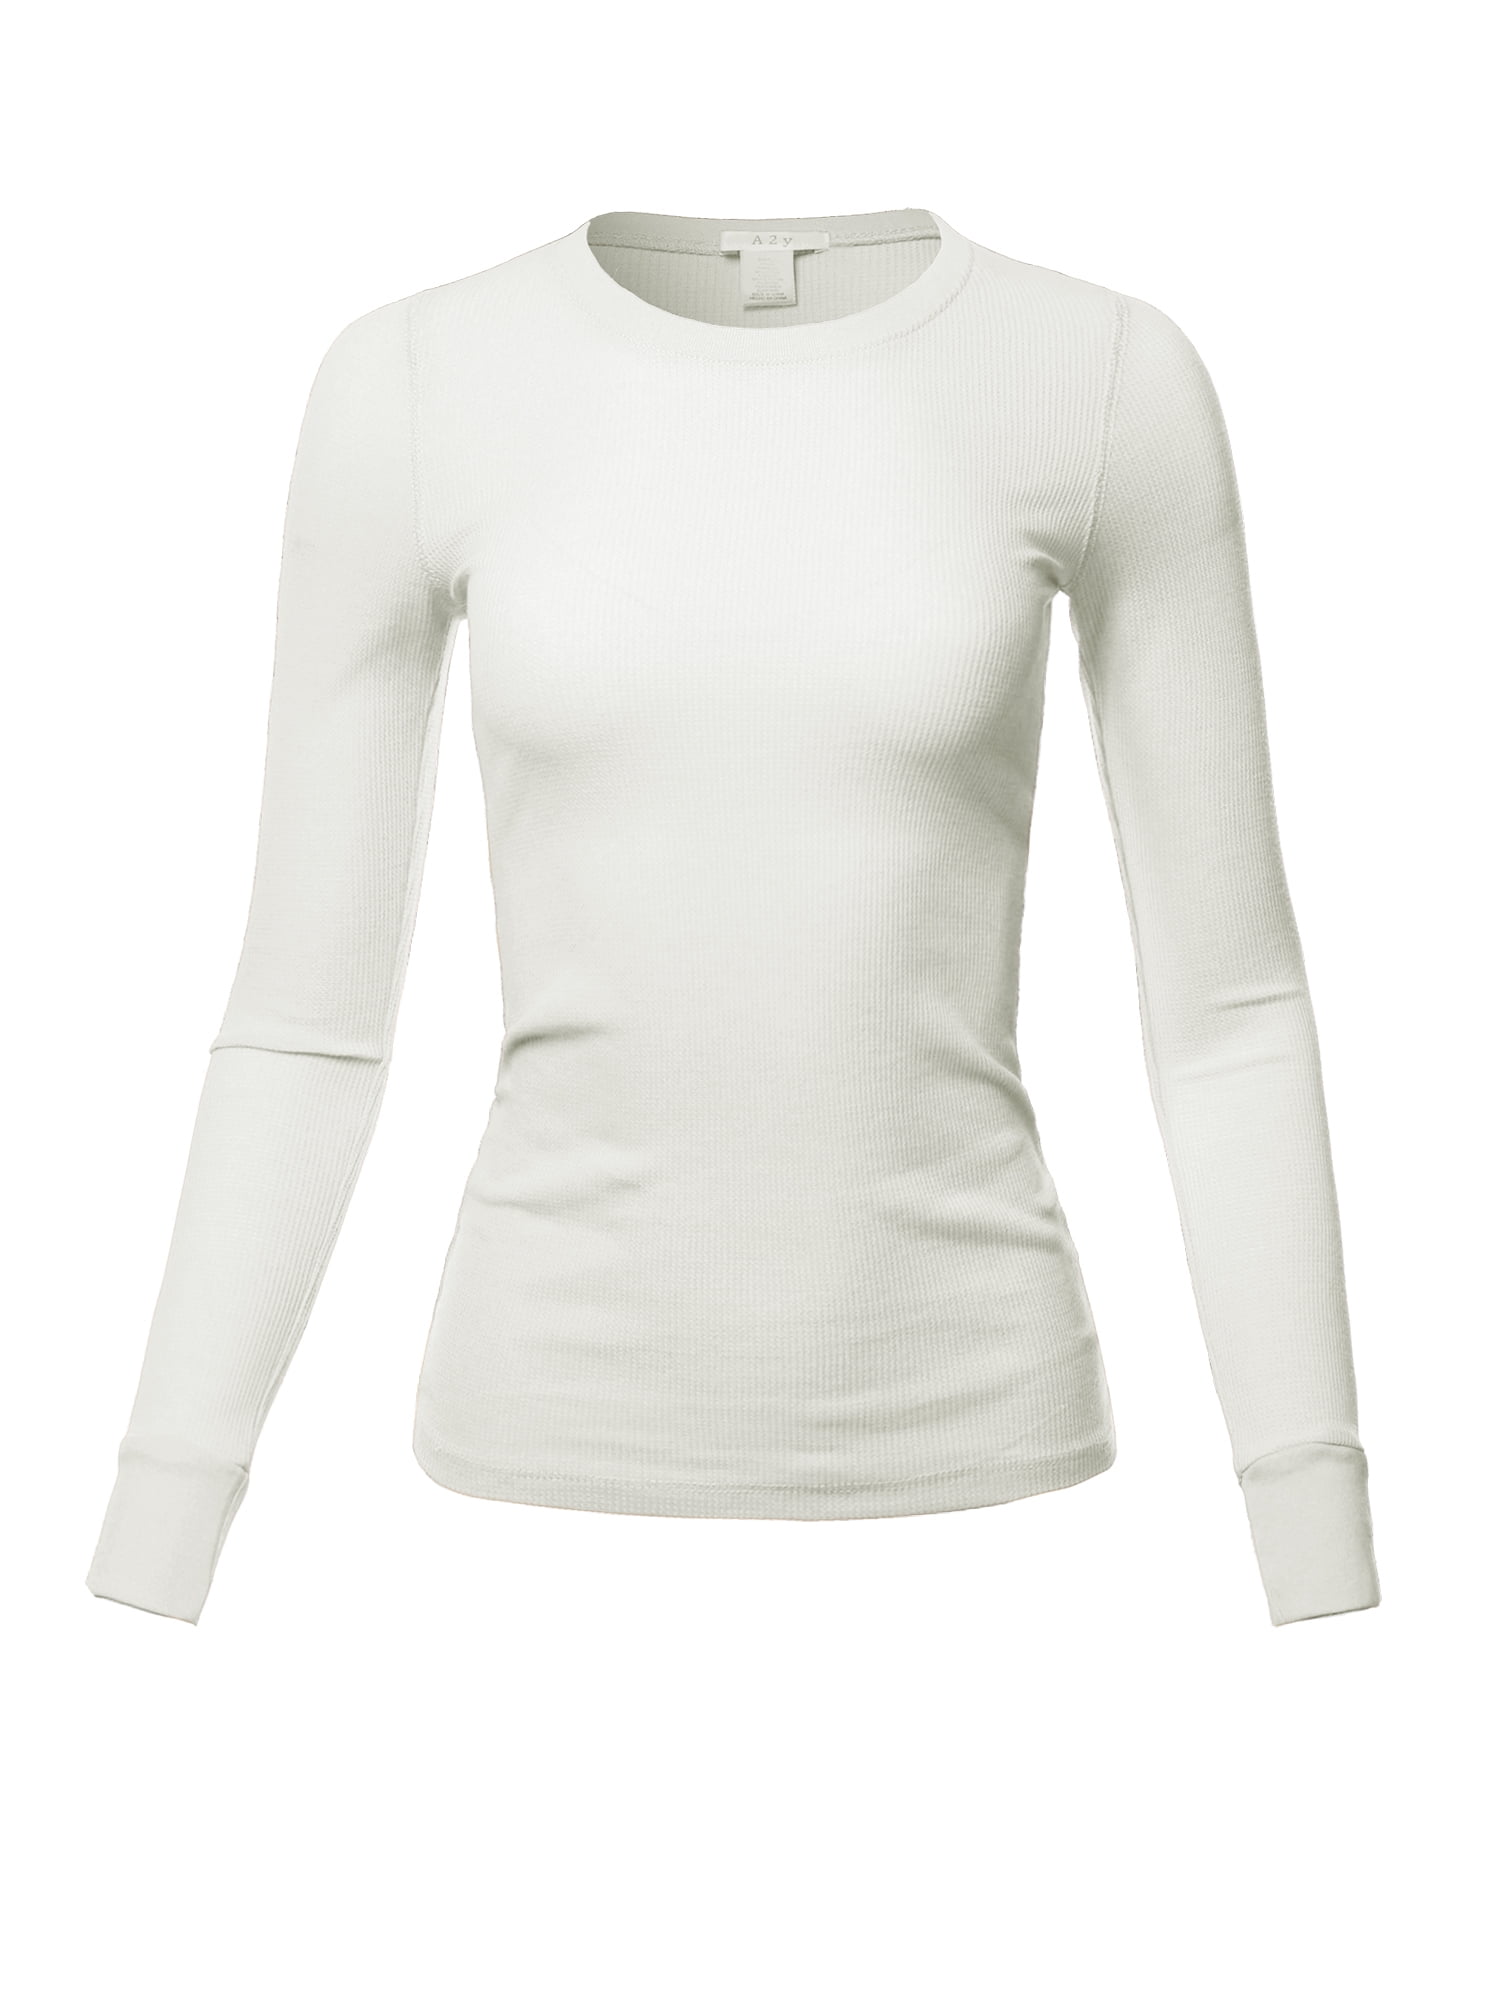 A2Y Women's Basic Solid Fitted Long Sleeve Crew Neck Thermal Top Shirt ...